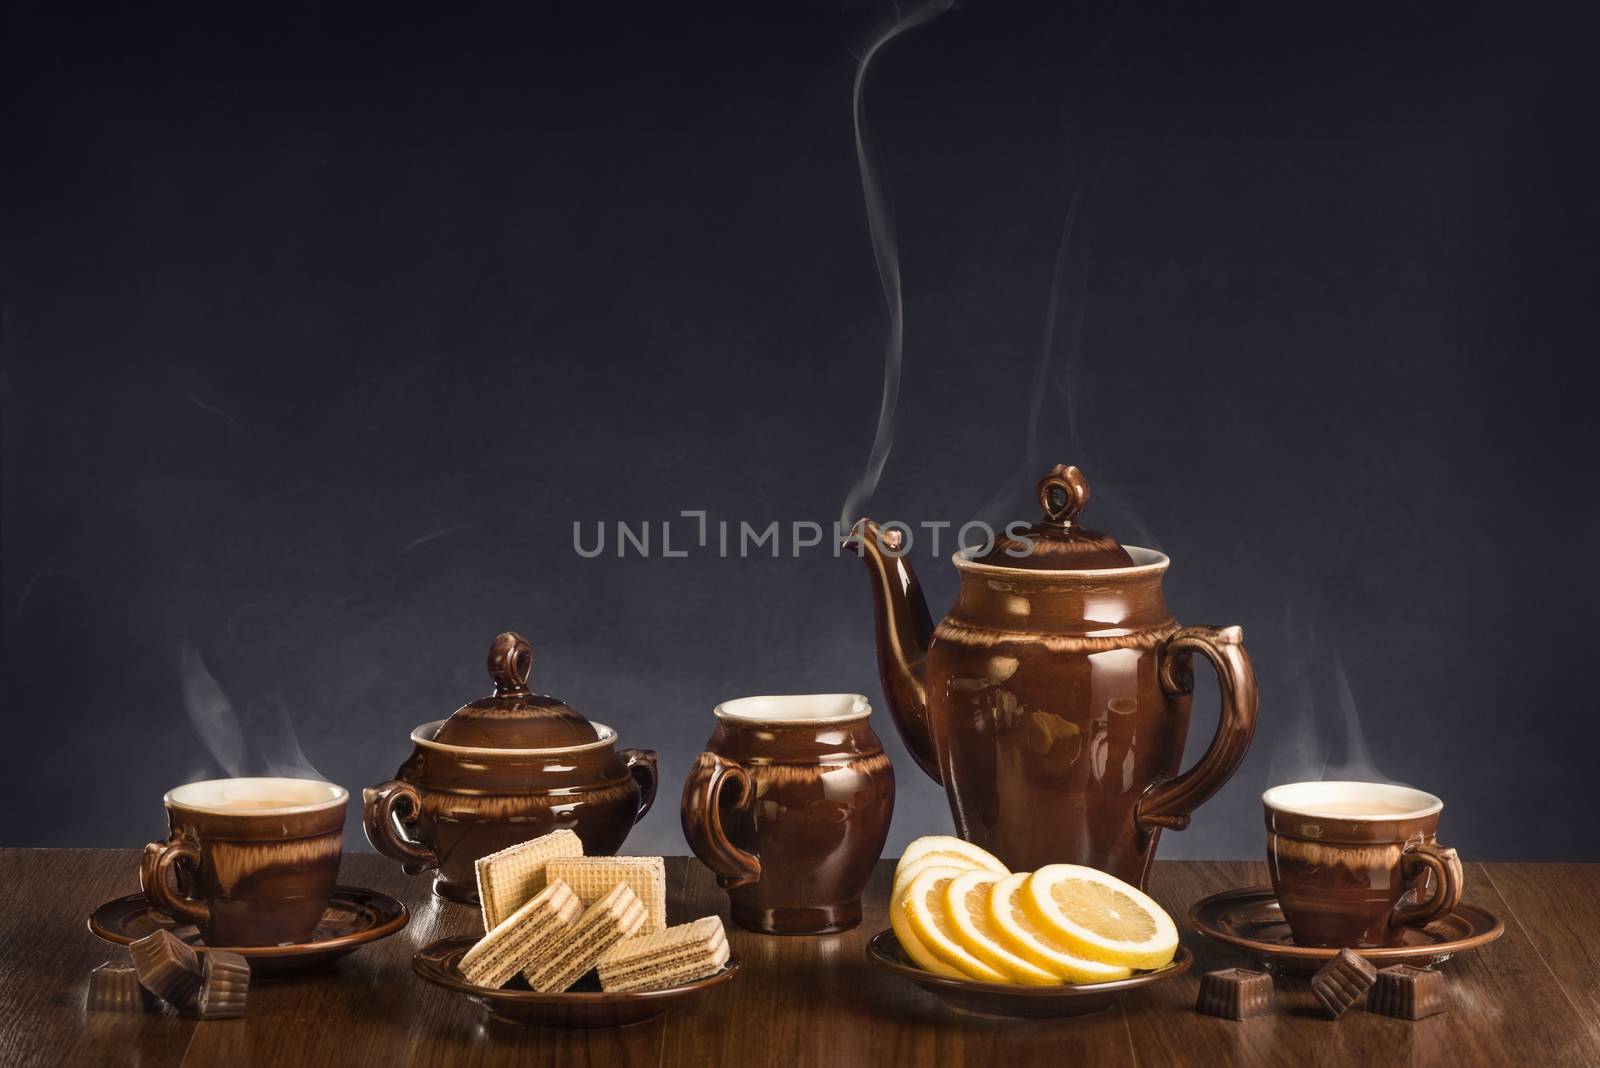 Hot coffee in cups and a dessert on a table against a dark background